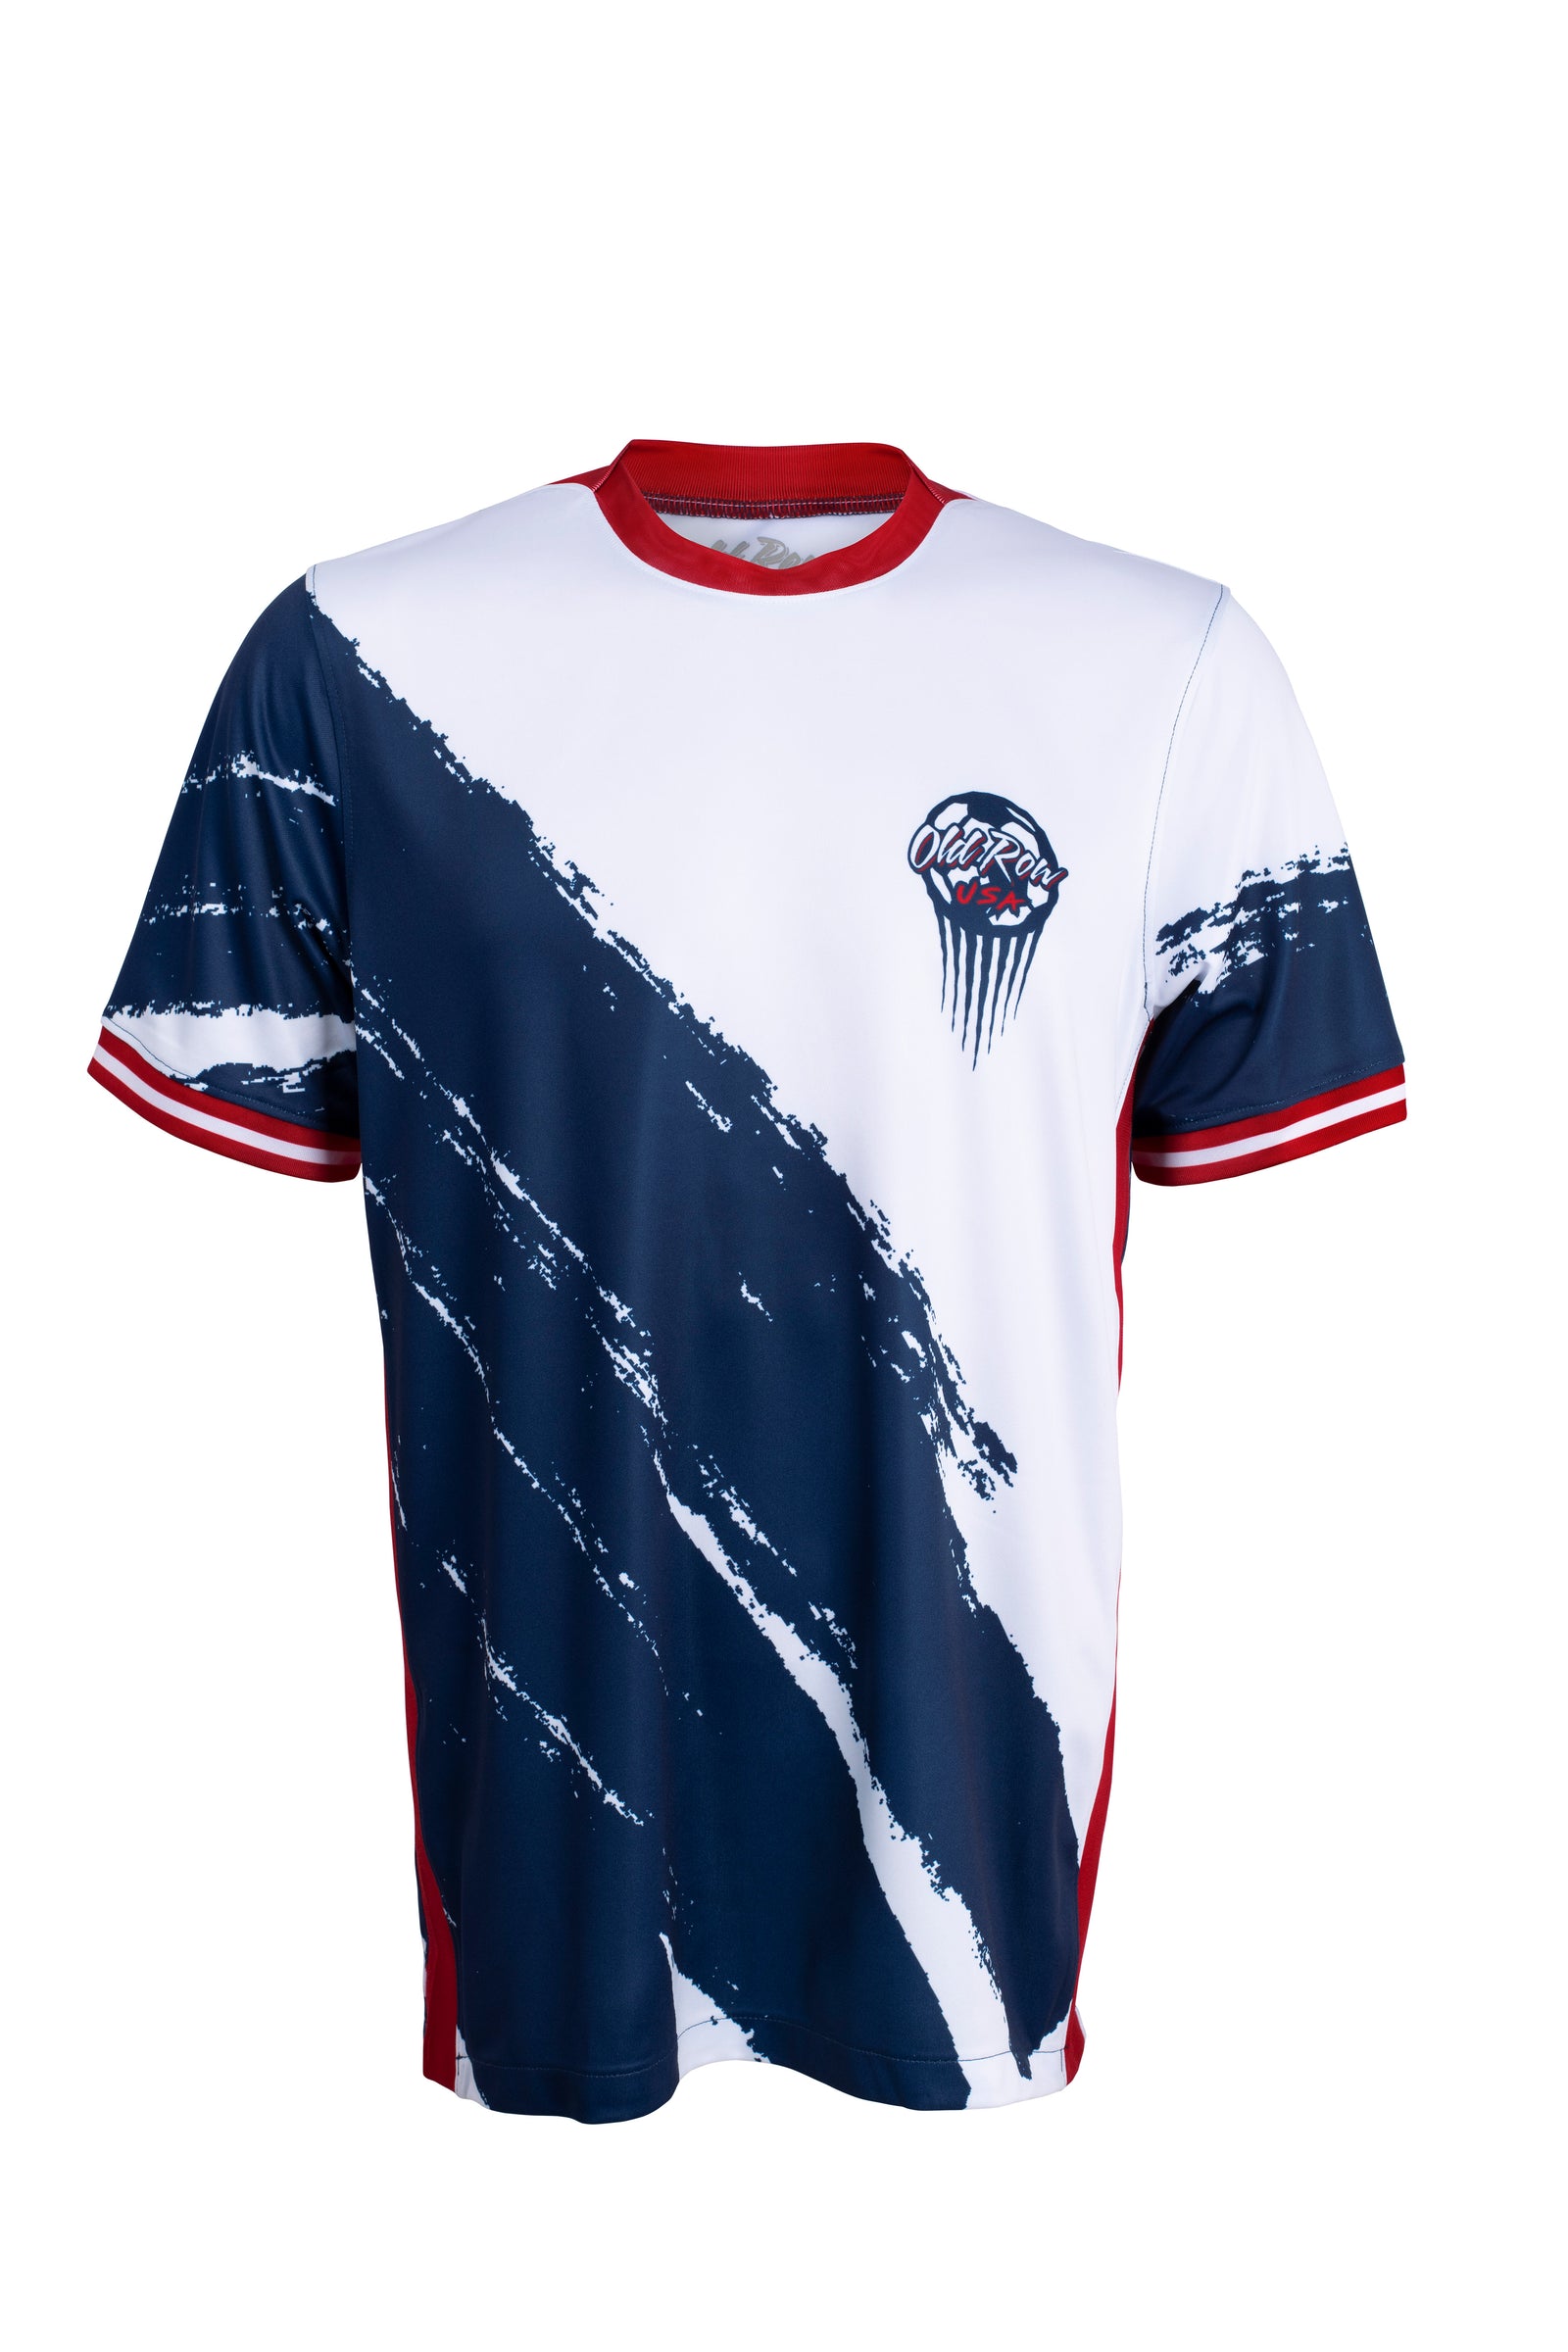 Old Row Soccer Jersey Old Row Shirts, Clothing & Merch